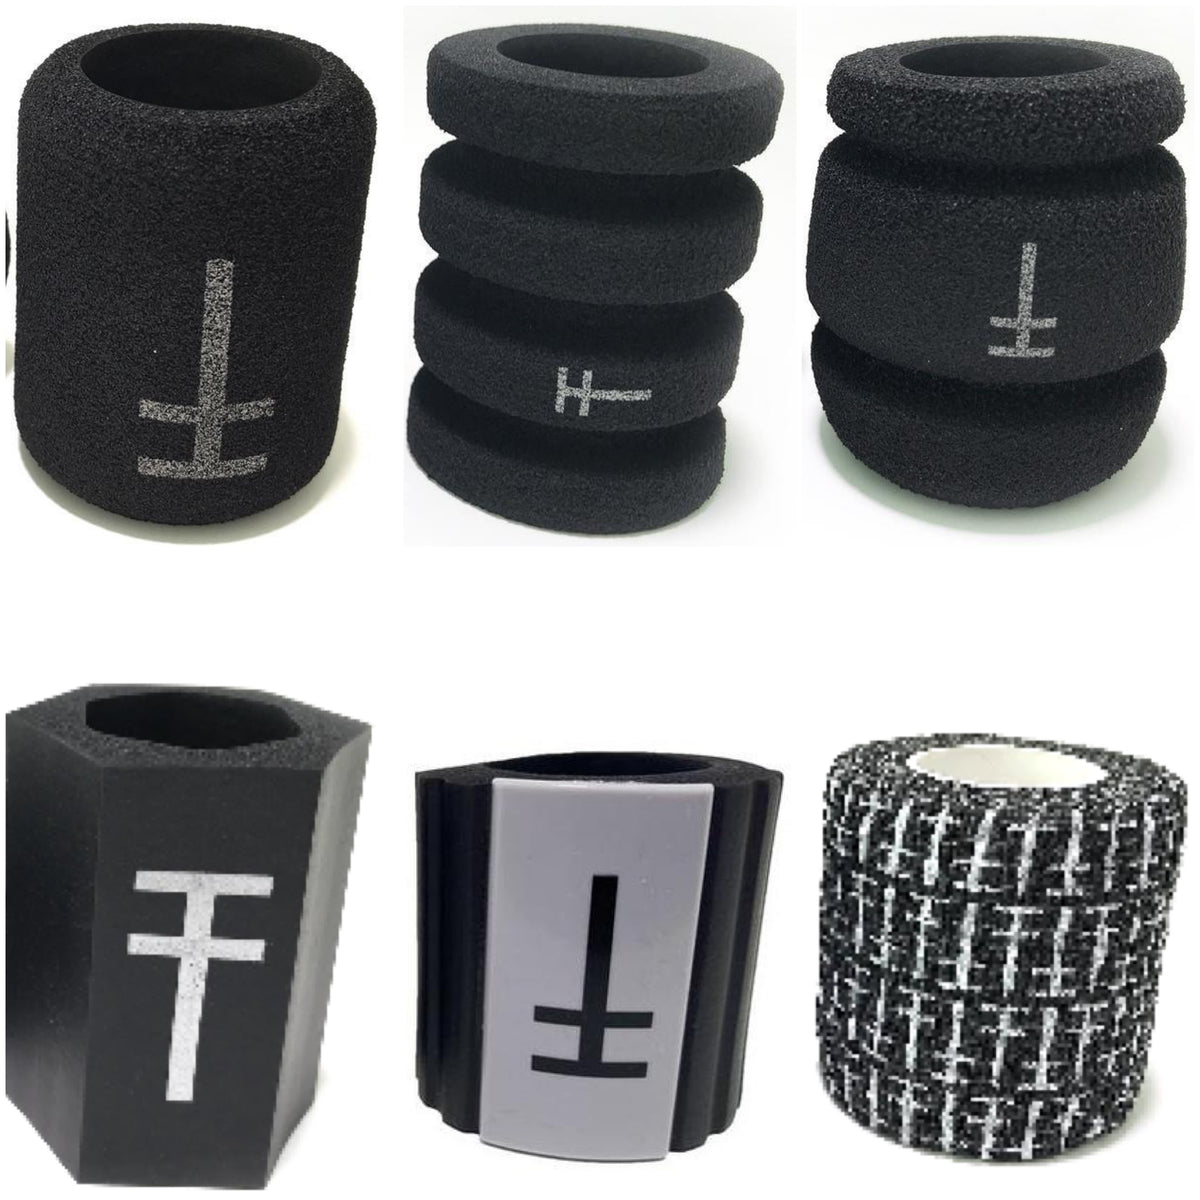 30mm disposable Silicone tattoo grips more stabilization for shader tattoo  grip G603C